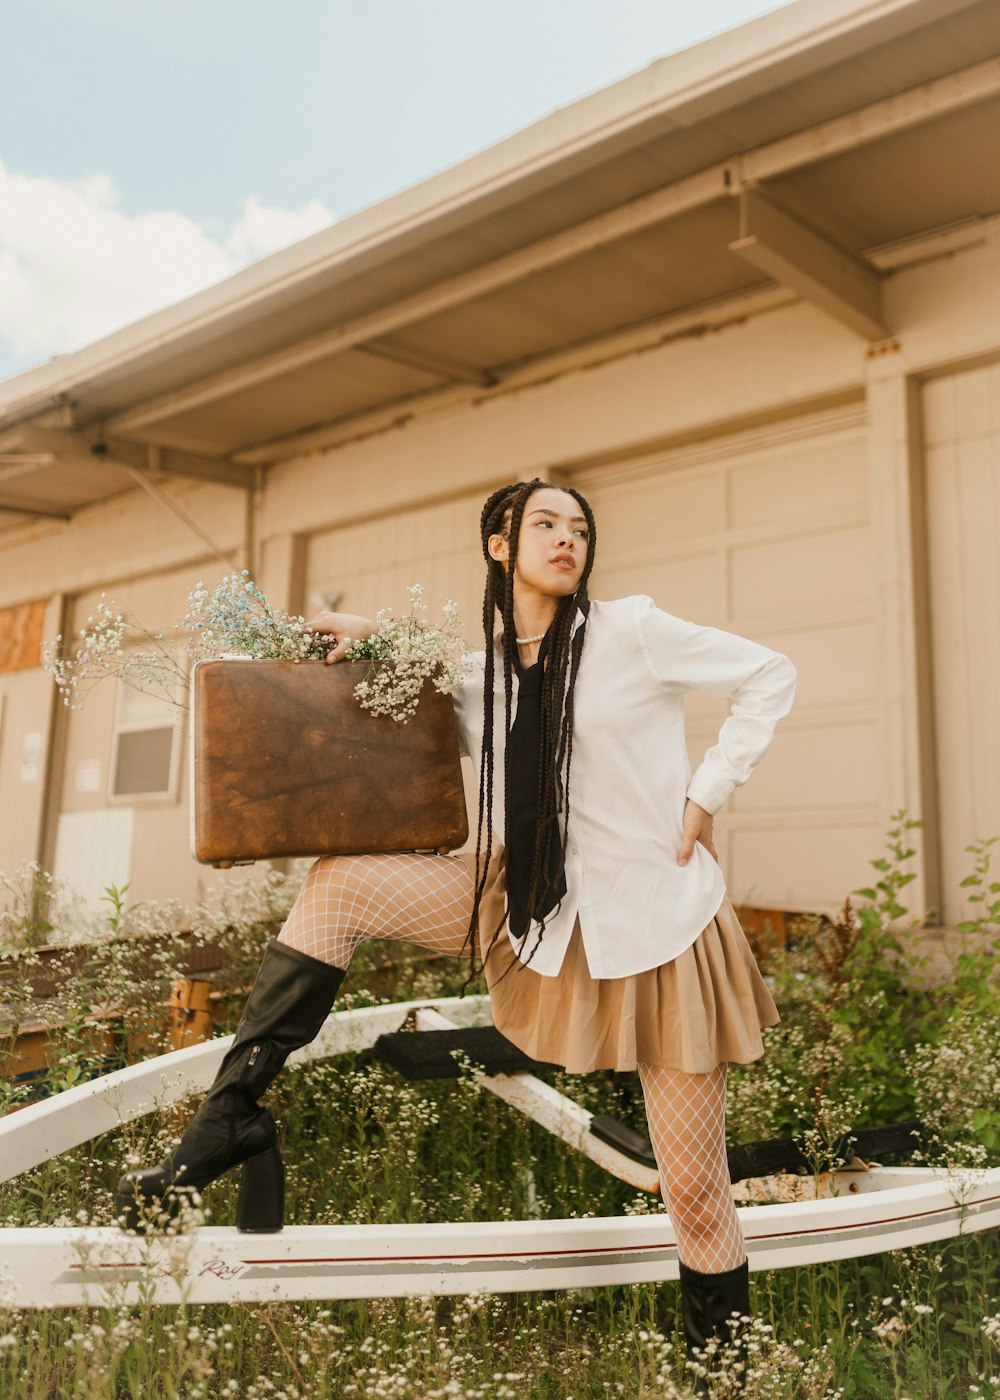 a woman in a white shirt and brown skirt holding a suitcase